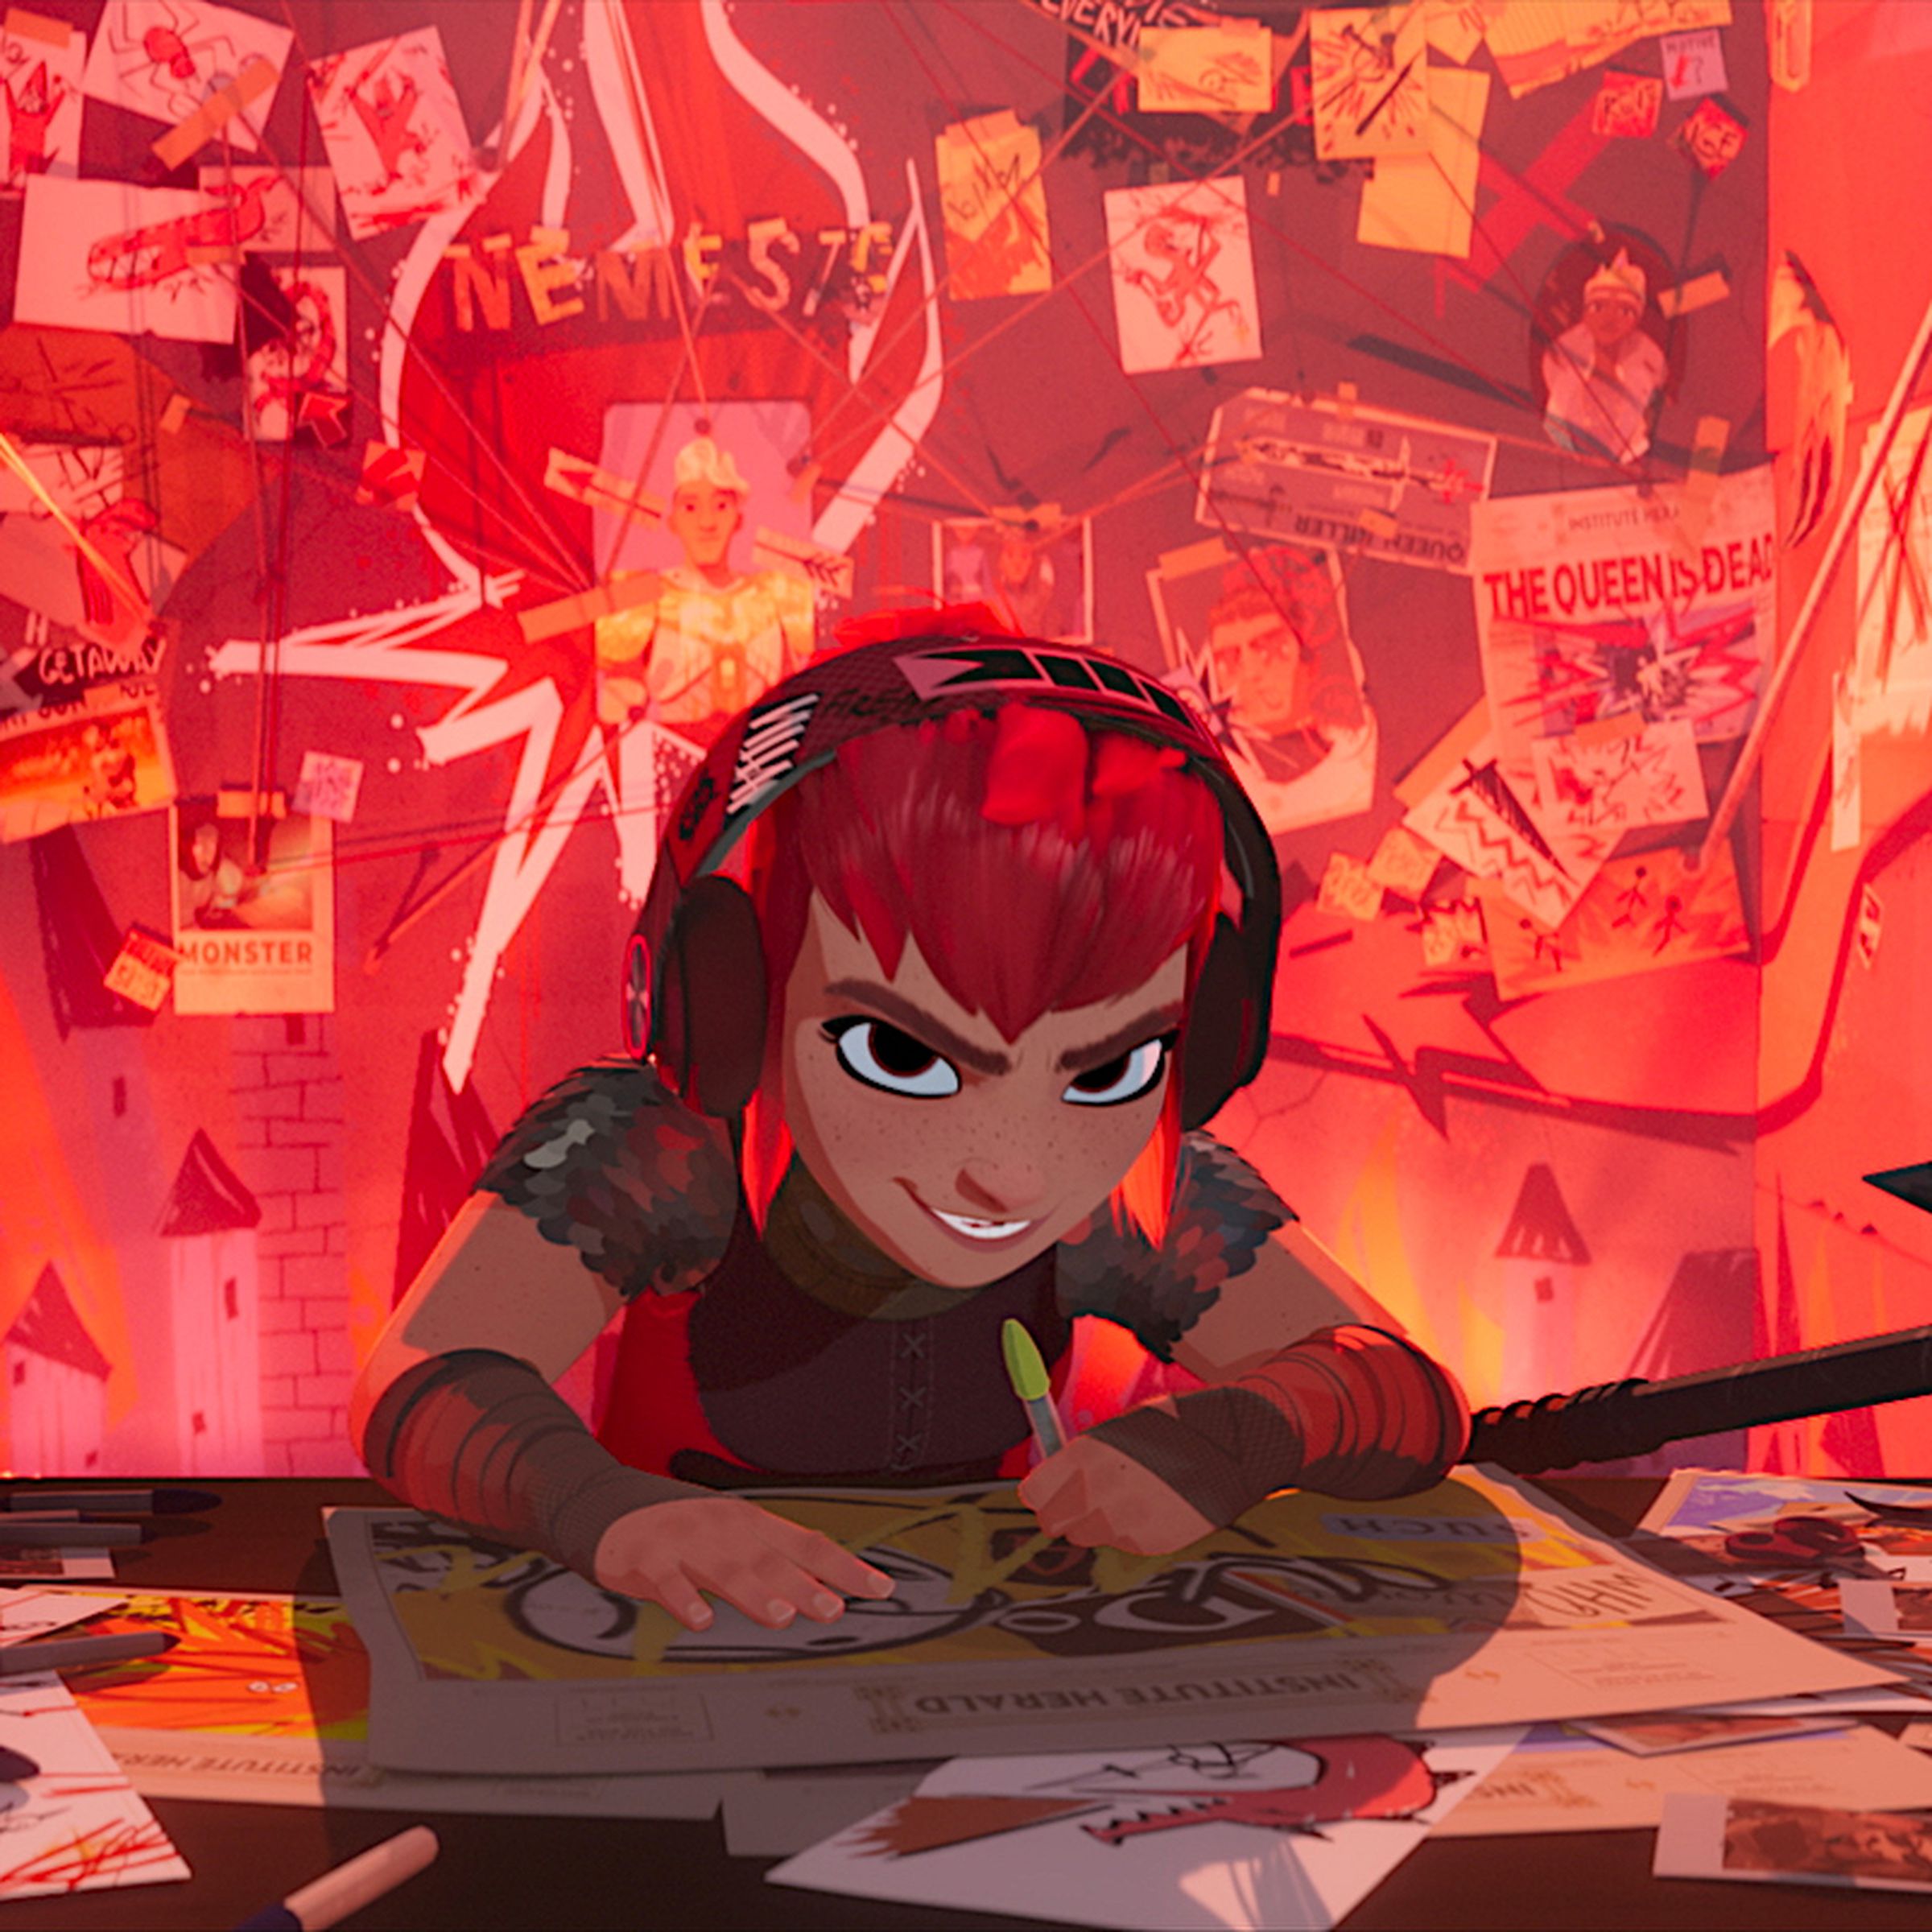 A redheaded child sitting at a cluttered table covered in papers and vicious weapons including a mace and multiple knives. In the background is a wall bathed in red light and plastered with pictures depicting a complicated plan.